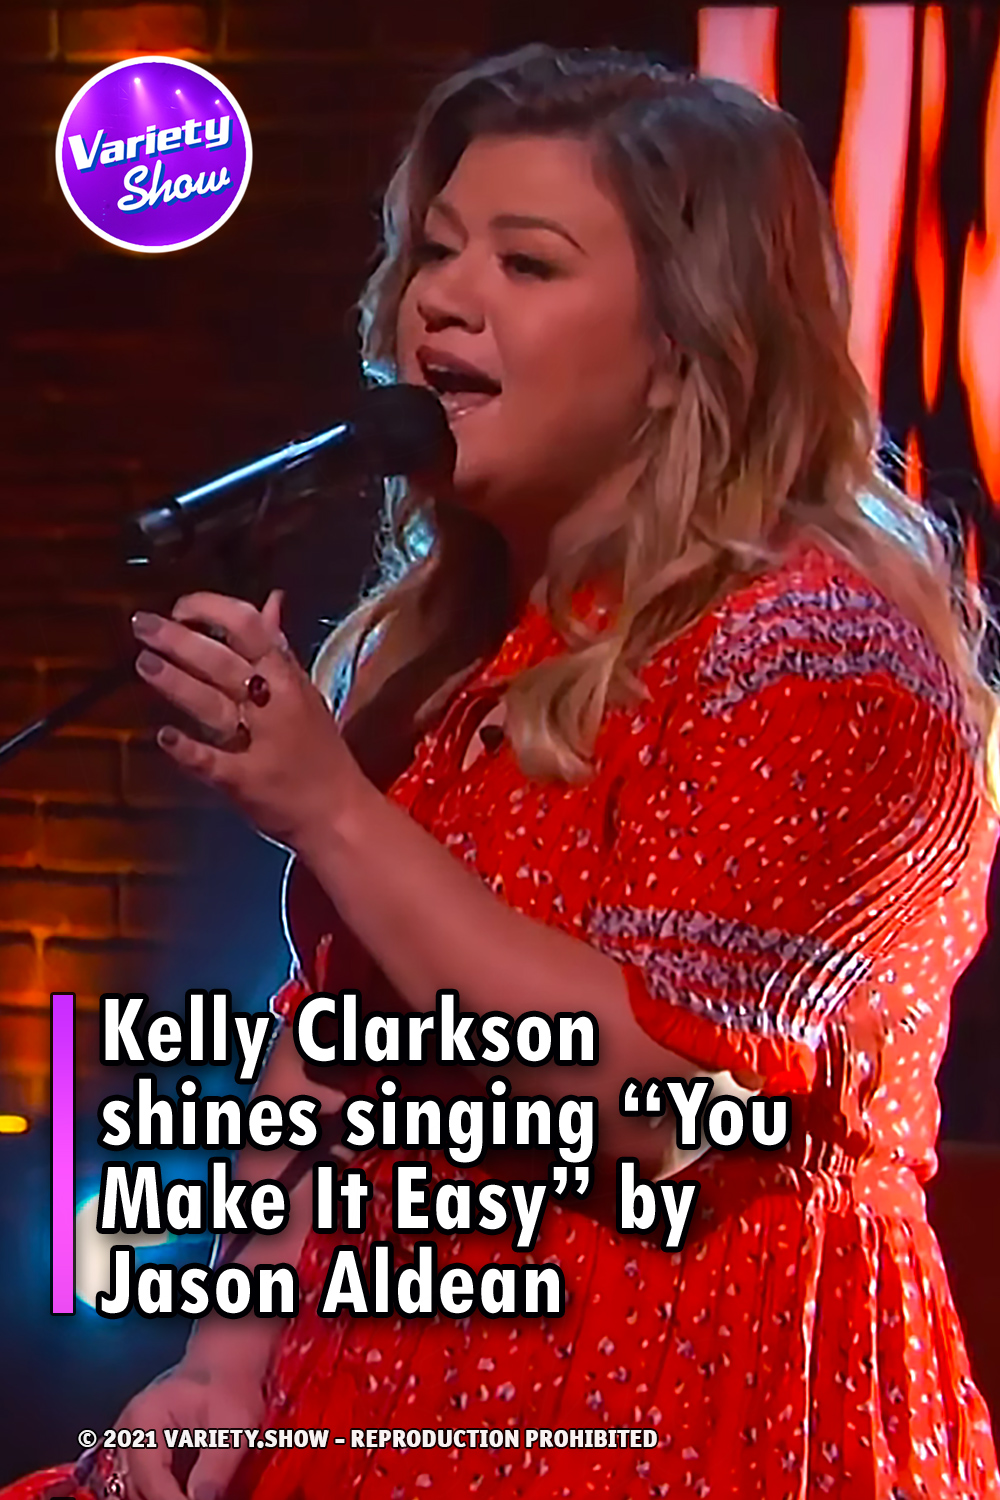 Kelly Clarkson shines singing “You Make It Easy” by Jason Aldean